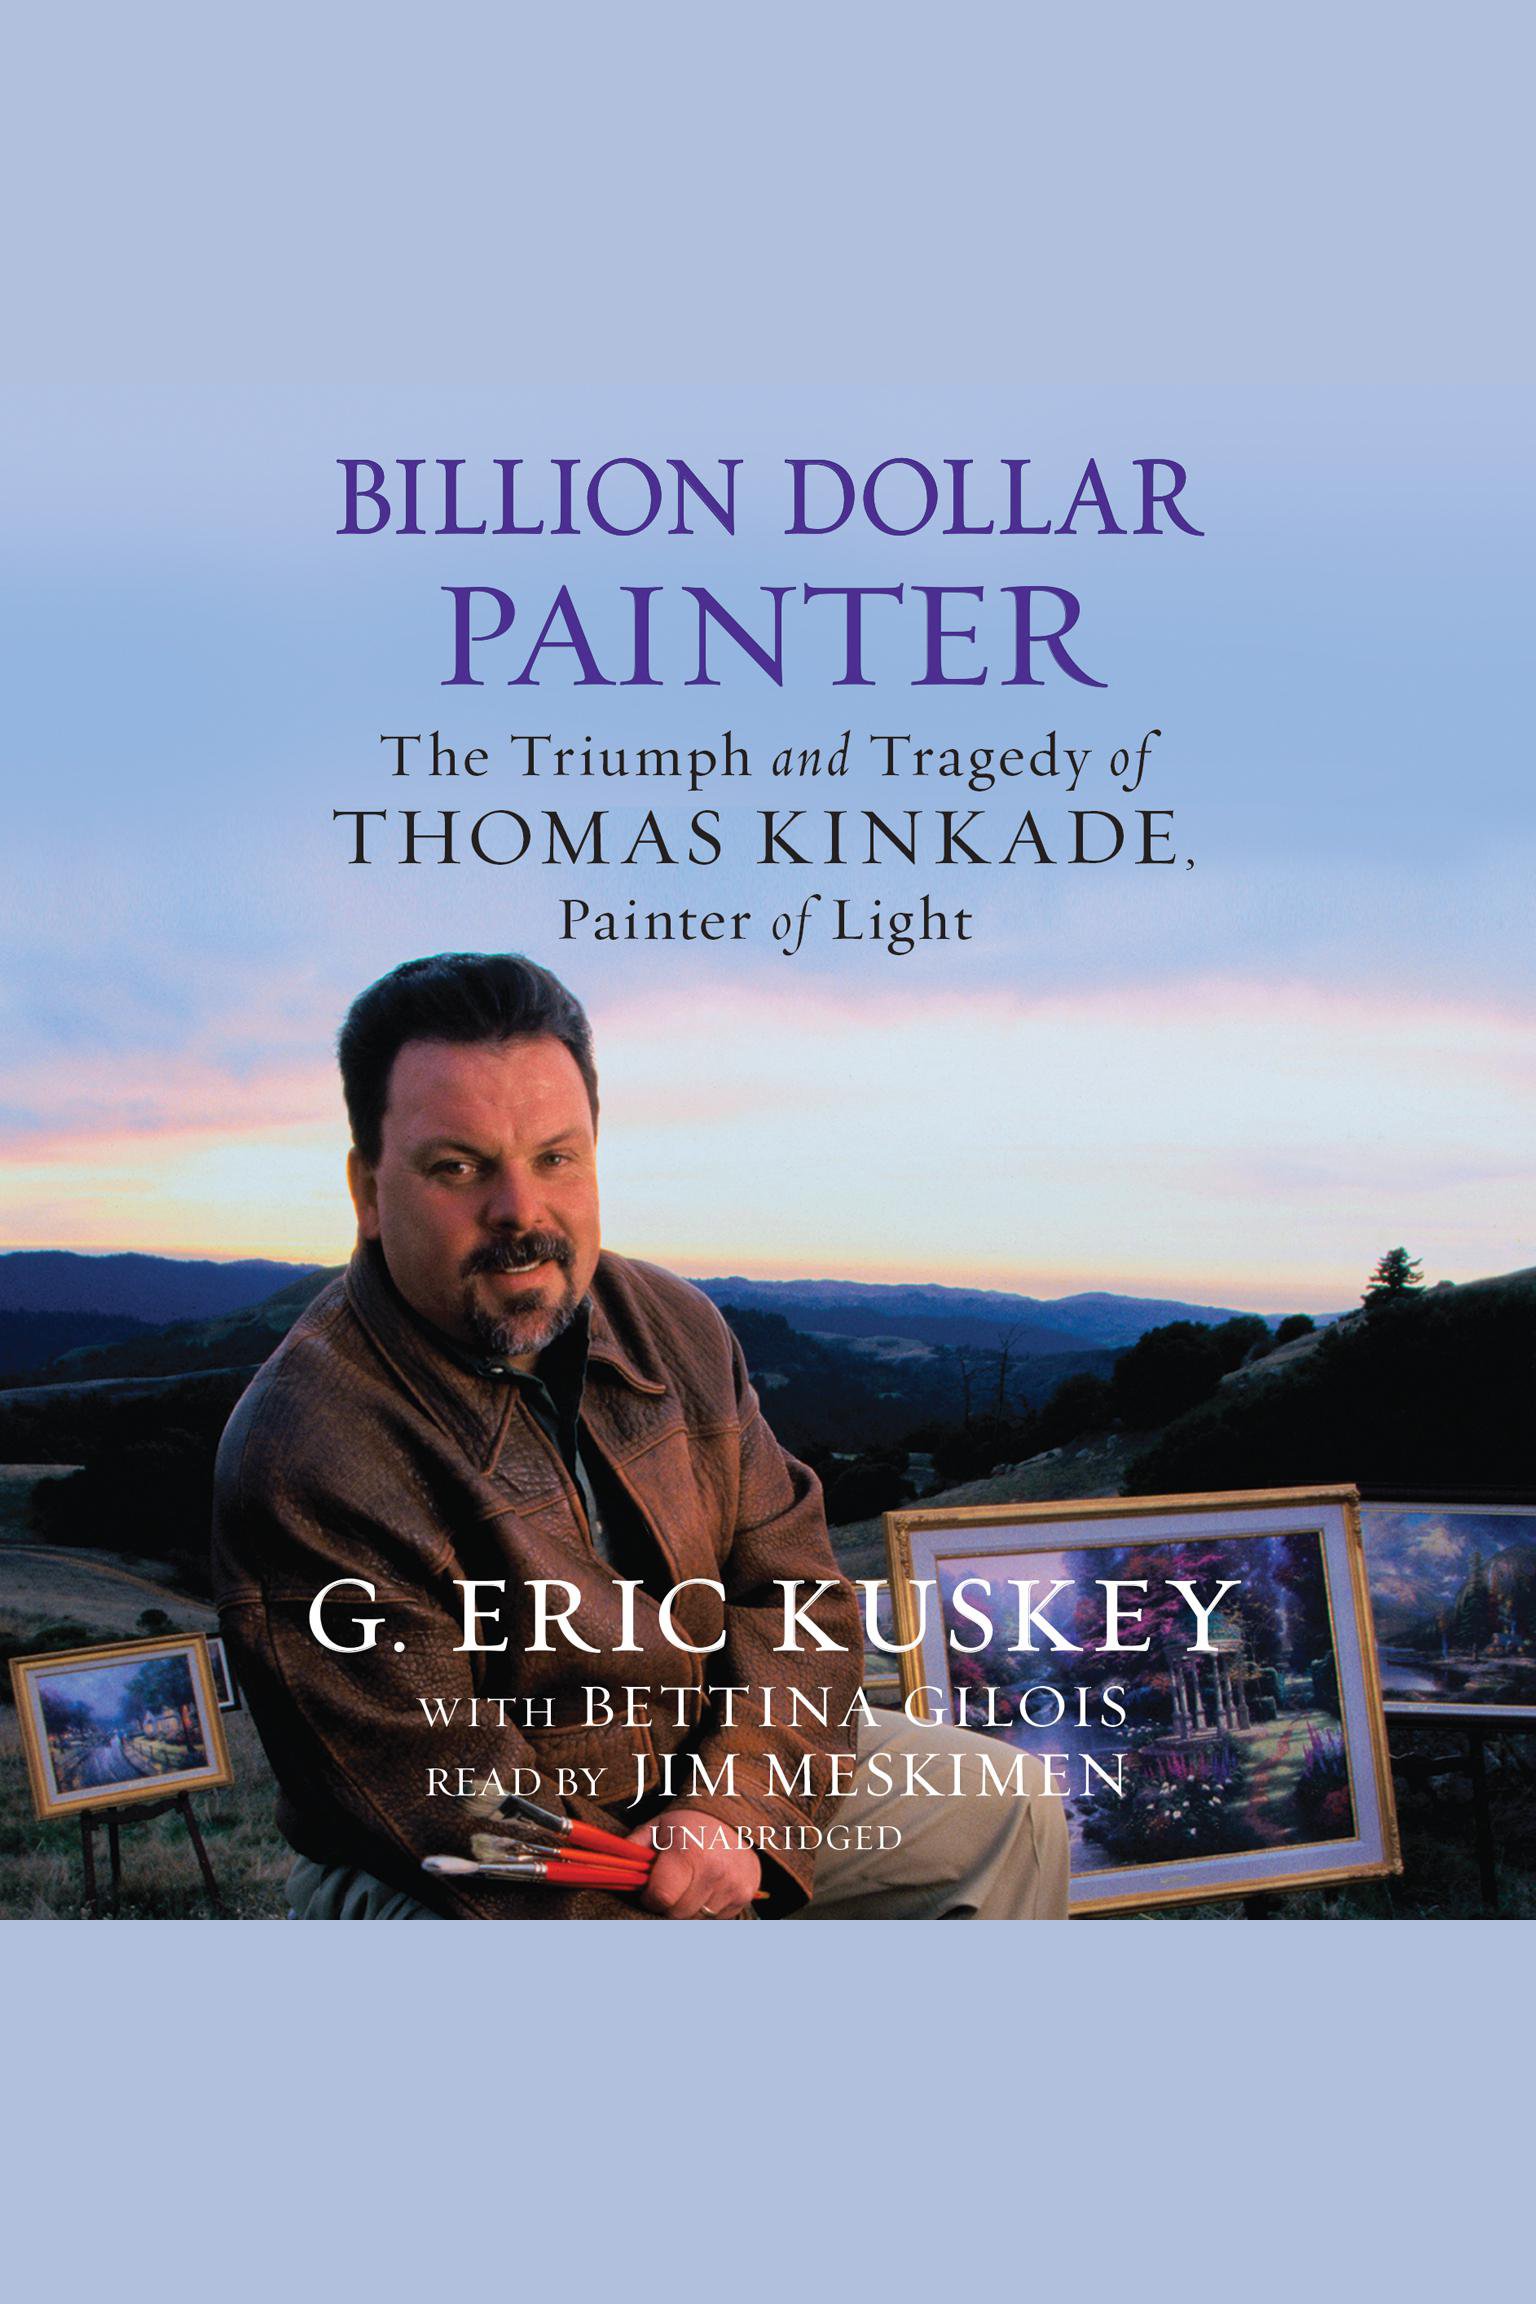 Billion dollar painter the triumph and tragedy of Thomas Kinkade, painter of light cover image